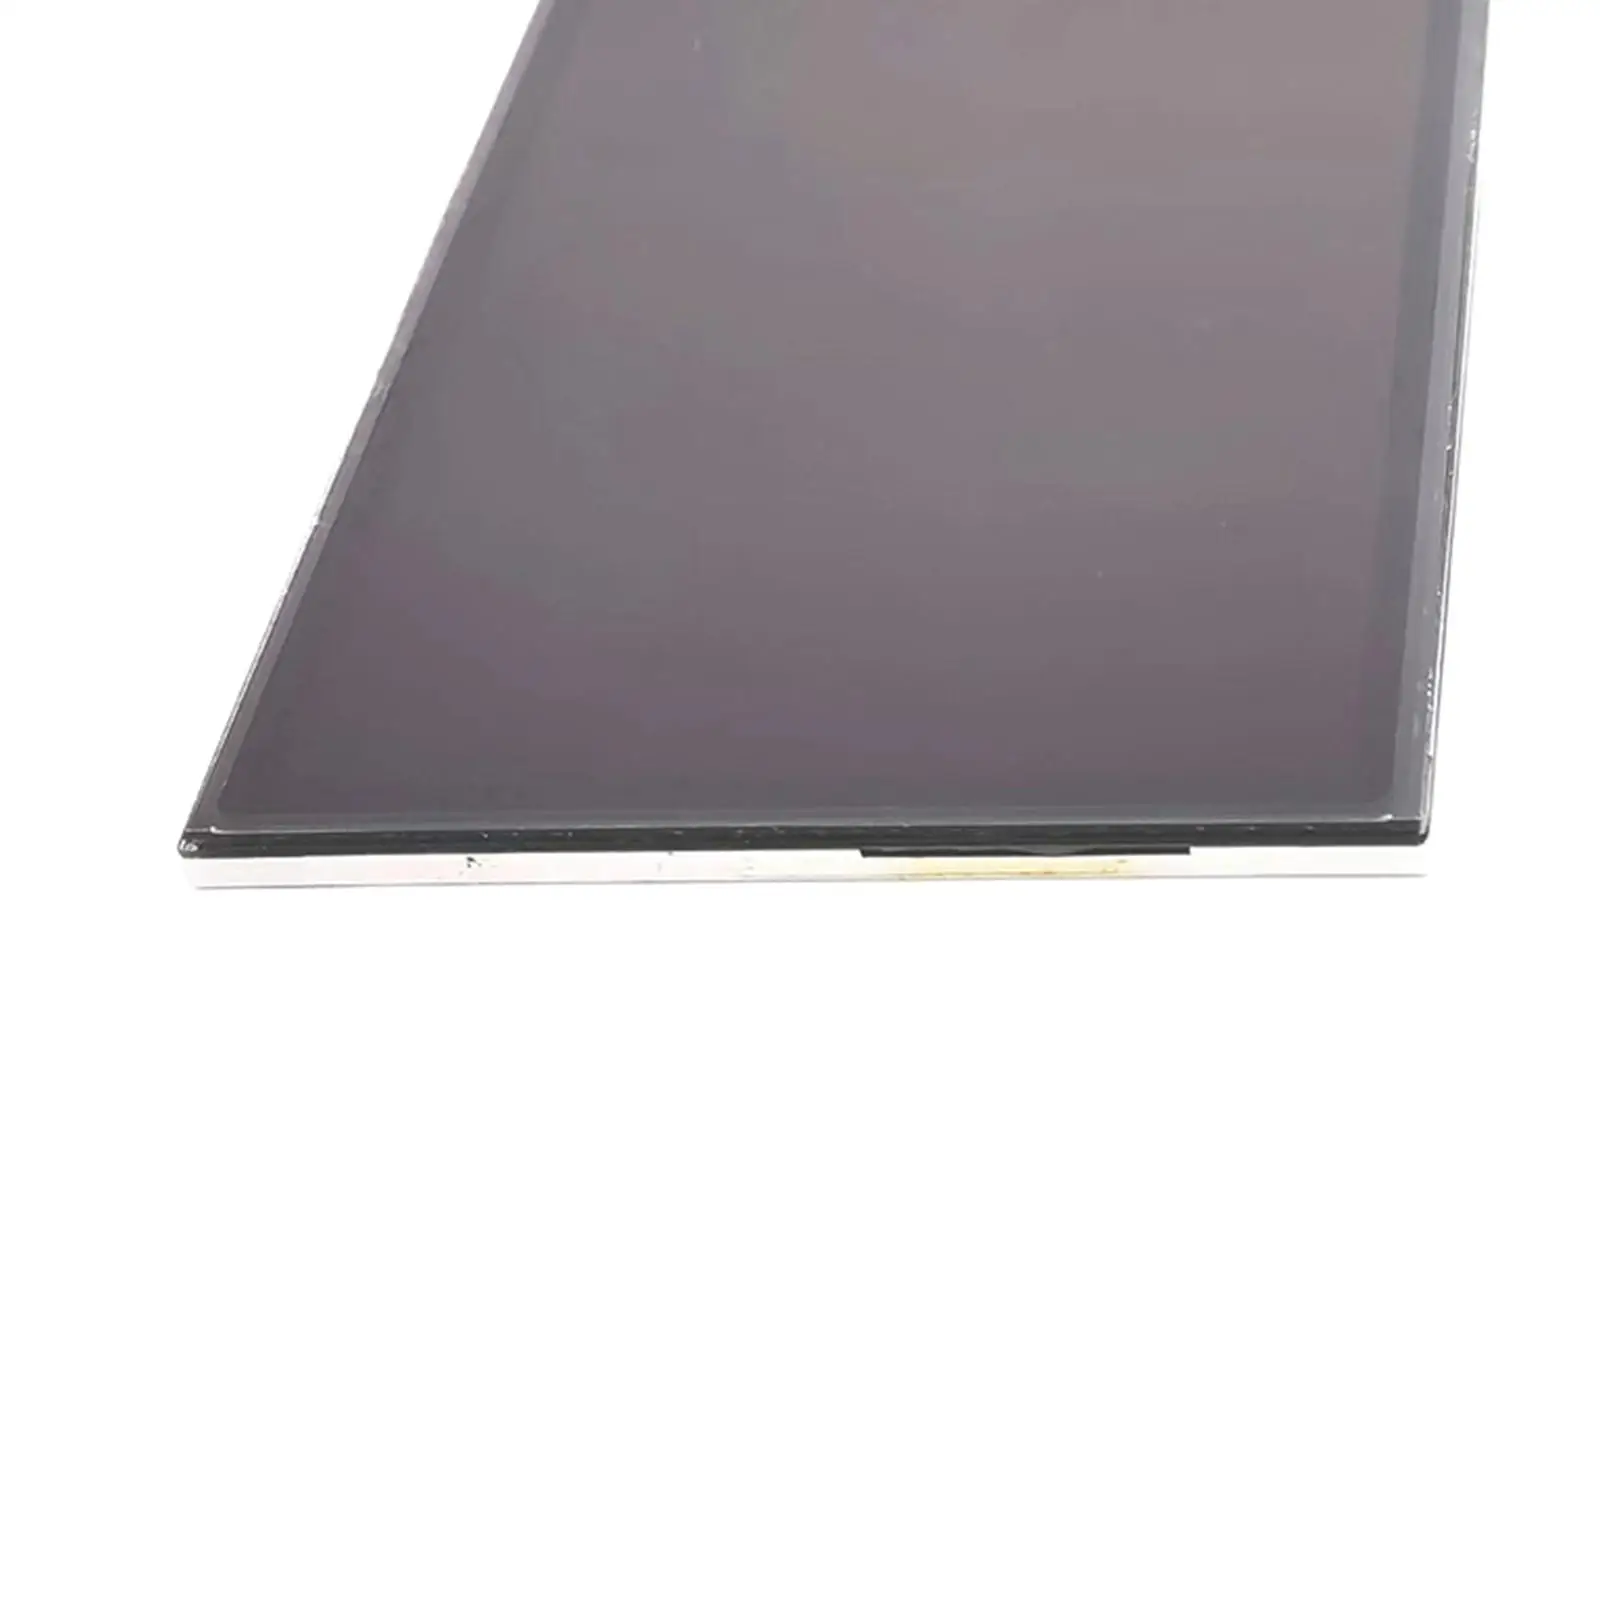 Professional Replacement LCD Display Screen with Touch Components Repair Part High Quality for Dsc-Tx7 TX9C XR550 TX9 TX7C